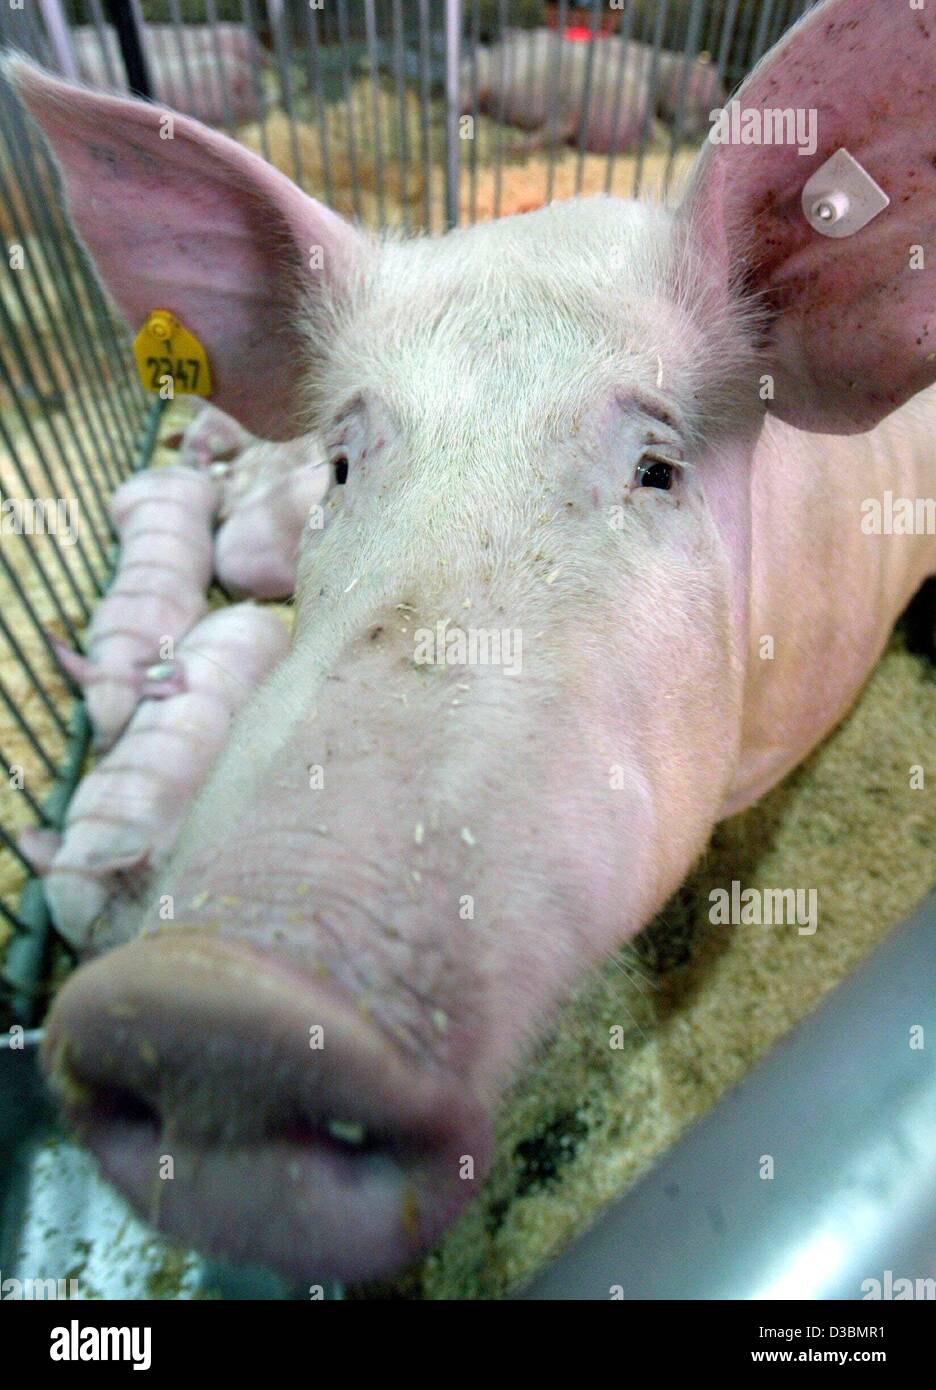 (dpa) - A sow looks out of a small animal cot during the agricultural trade fair 'Agra 2003' in Markleeberg, Germany, 22 May 2003. More then 750 exhibitors present their range of products concerning agriculture and livestock husbandry. The fair will last until 25 May 2003. Stock Photo